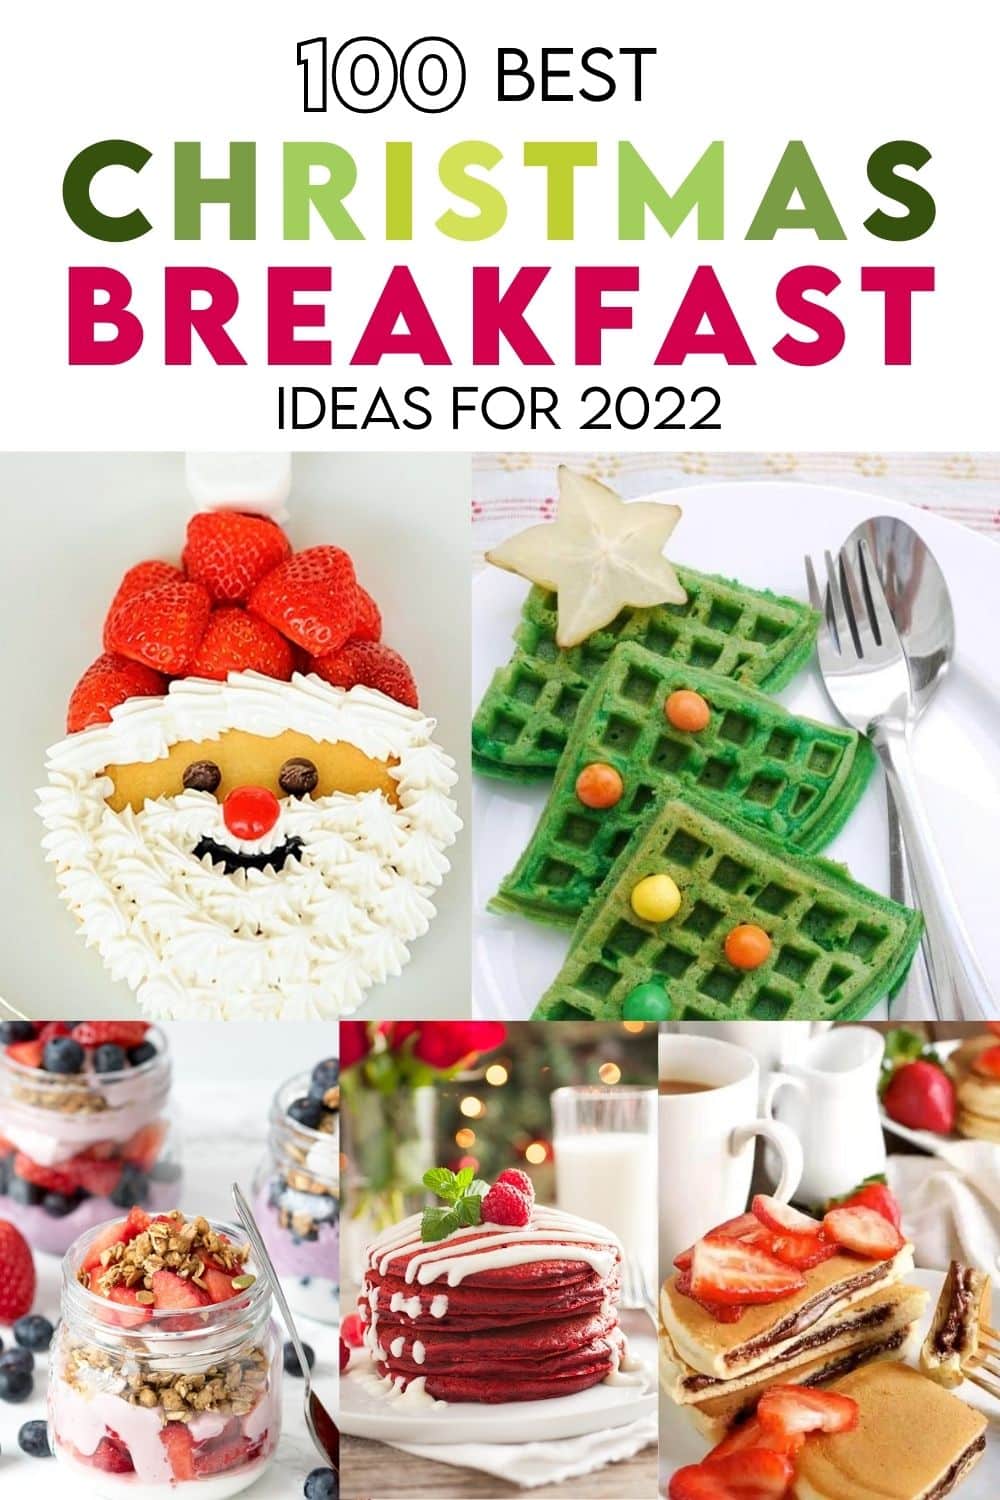 Check out this list of 100 fun and festive Christmas breakfast ideas! | The Dating Divas